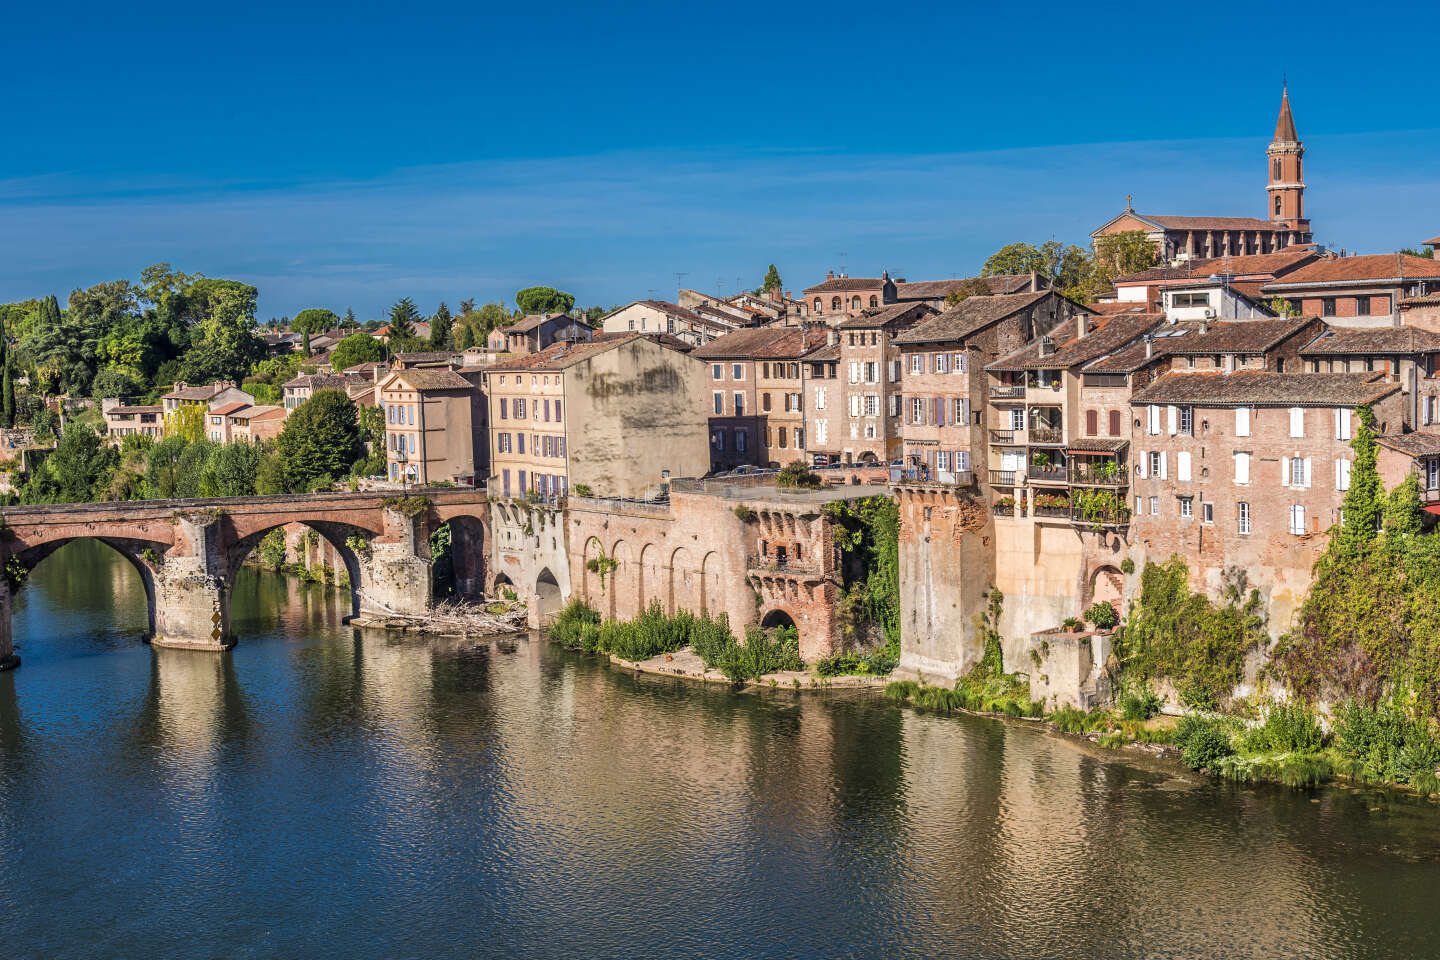 Immobilier : Albi, ville moyenne, grandes ambitions